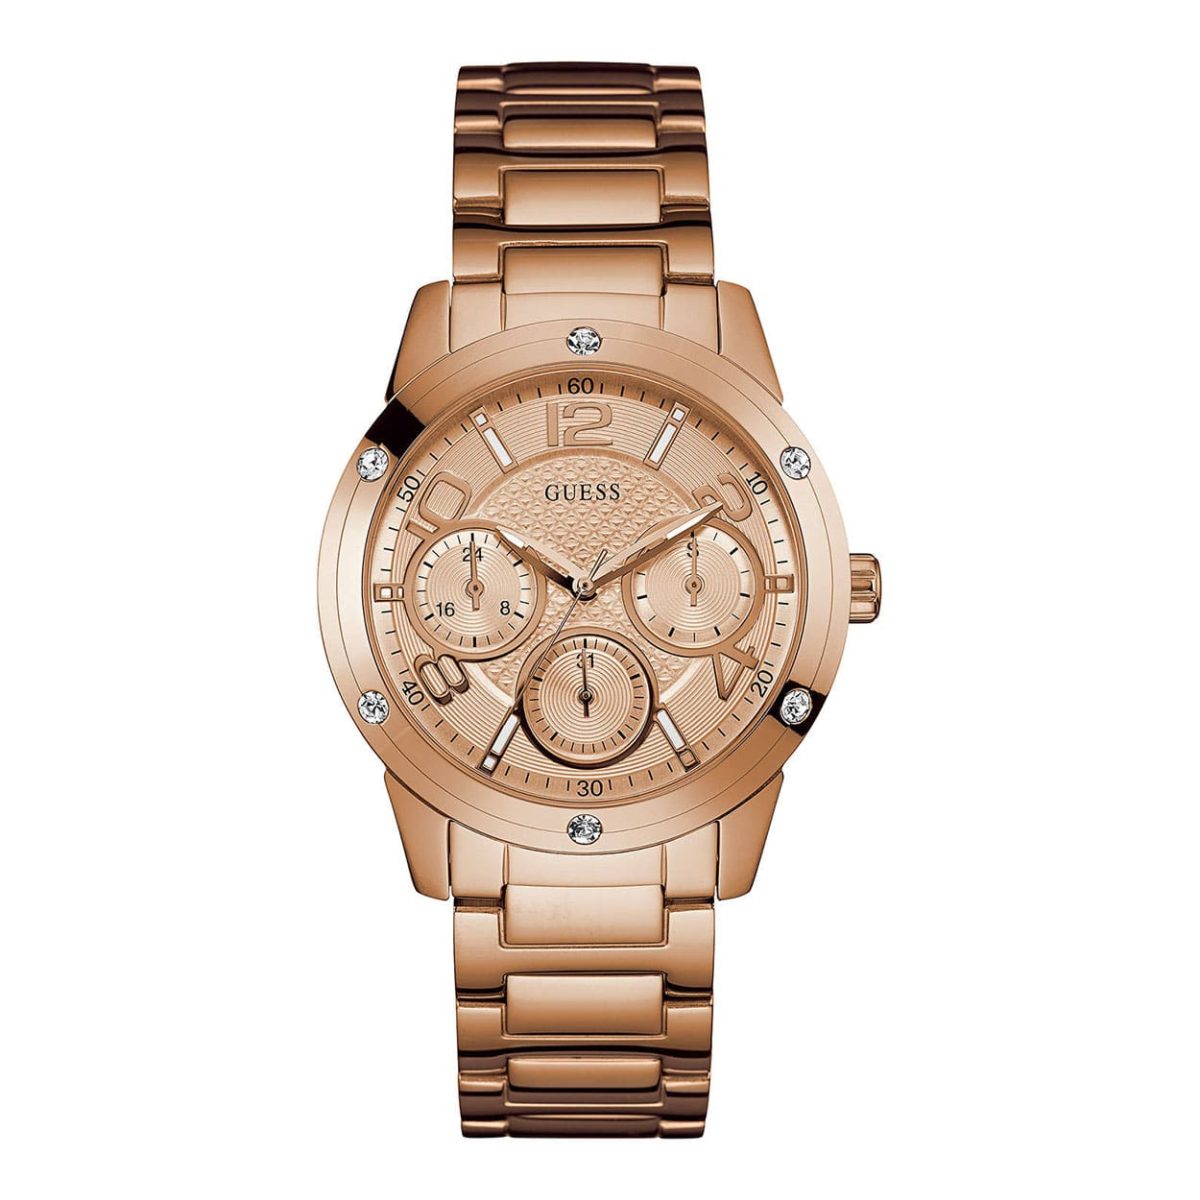 Guess Crystals Multi-function Rose Gold Stainless Steel Bracelet Women's Watch - W0705L3